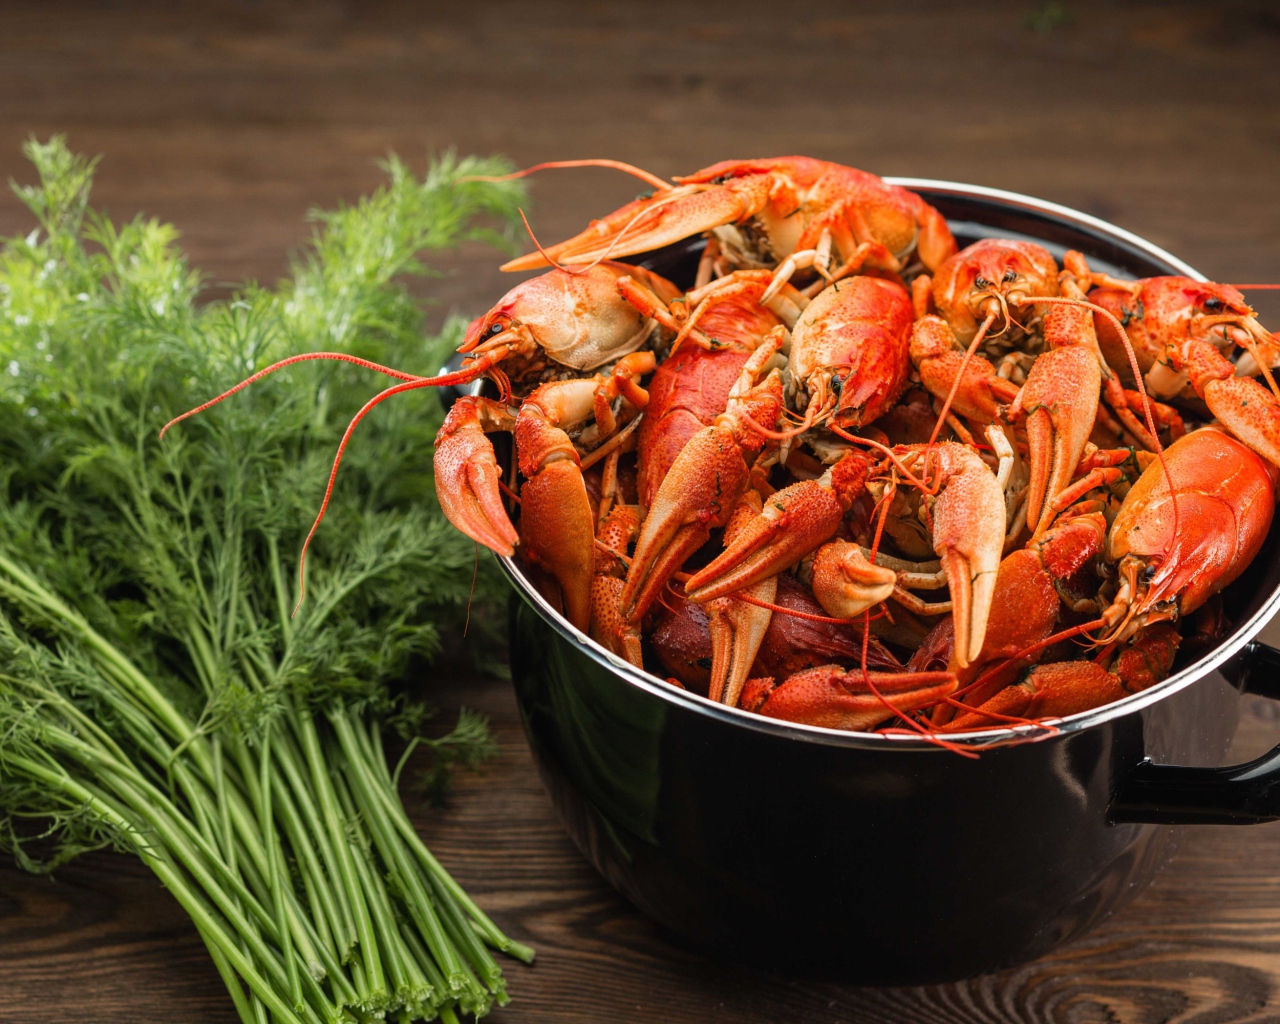 Boiled crayfish in a pan on the table with dill